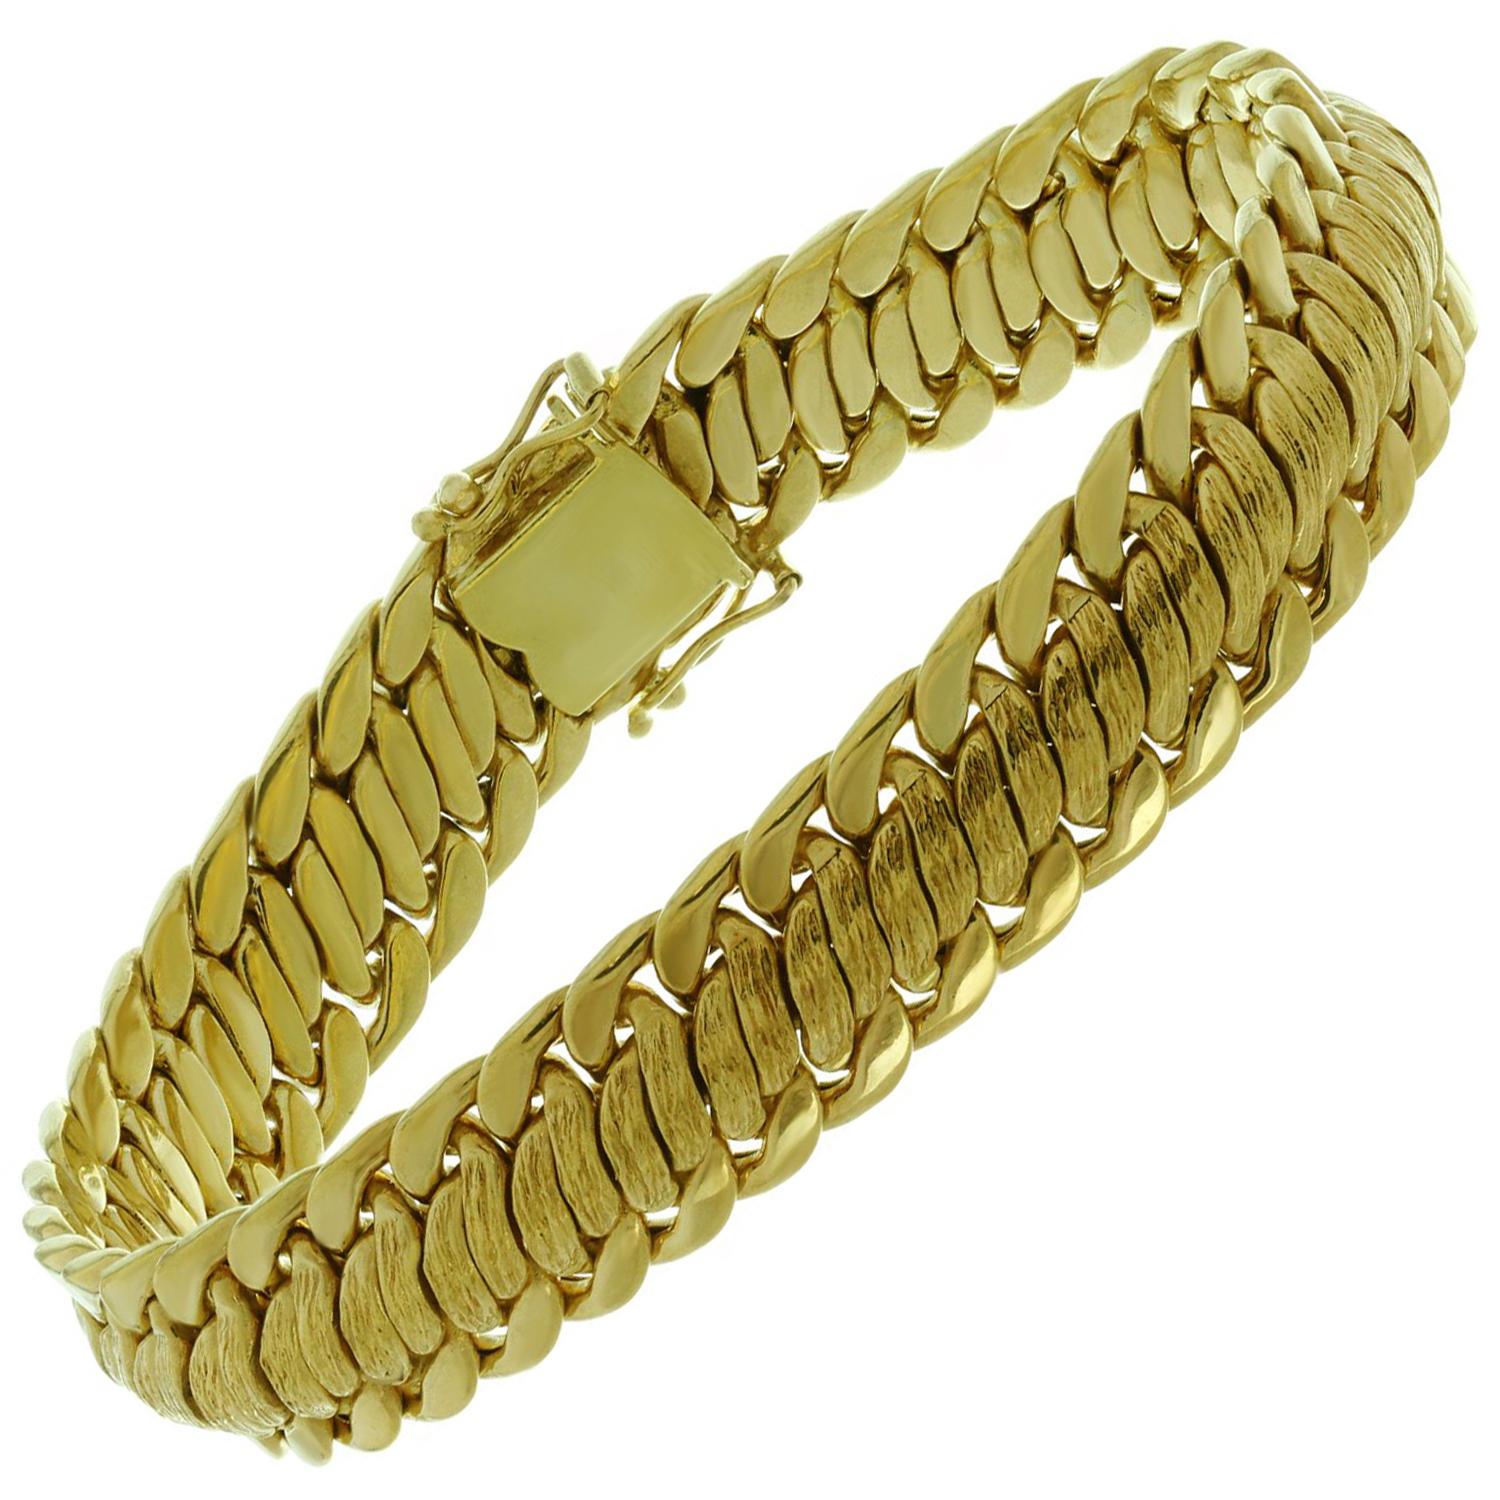 Vintage 18k Solid Yellow Gold Braided Bracelet.  For Sale